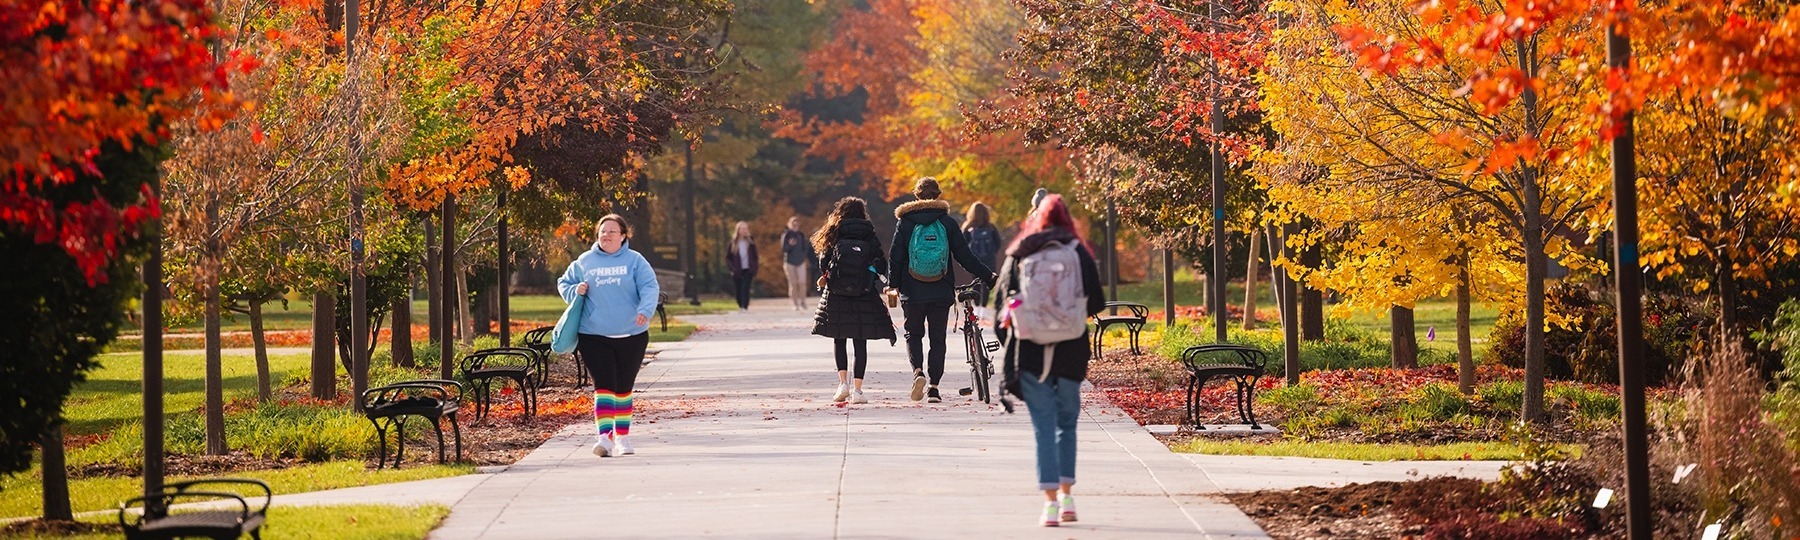 Central Michigan University fall campus scenic with students walking to class